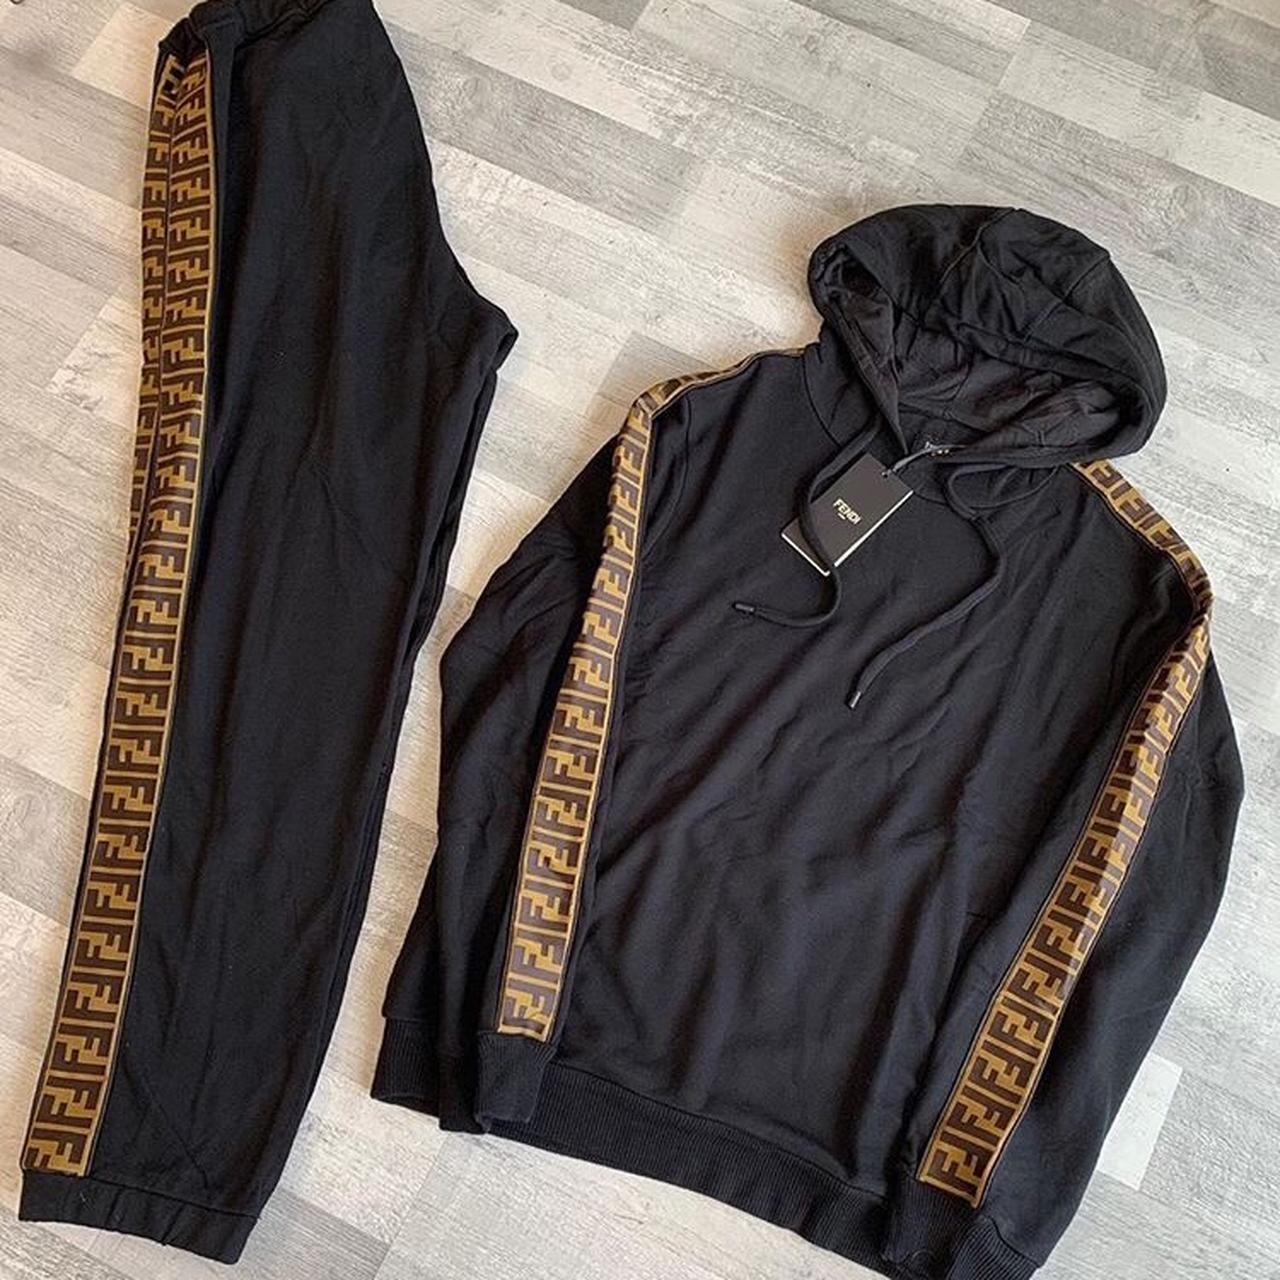 Fendi Tracksuit Size XL In great condition RRP £1500 - Depop